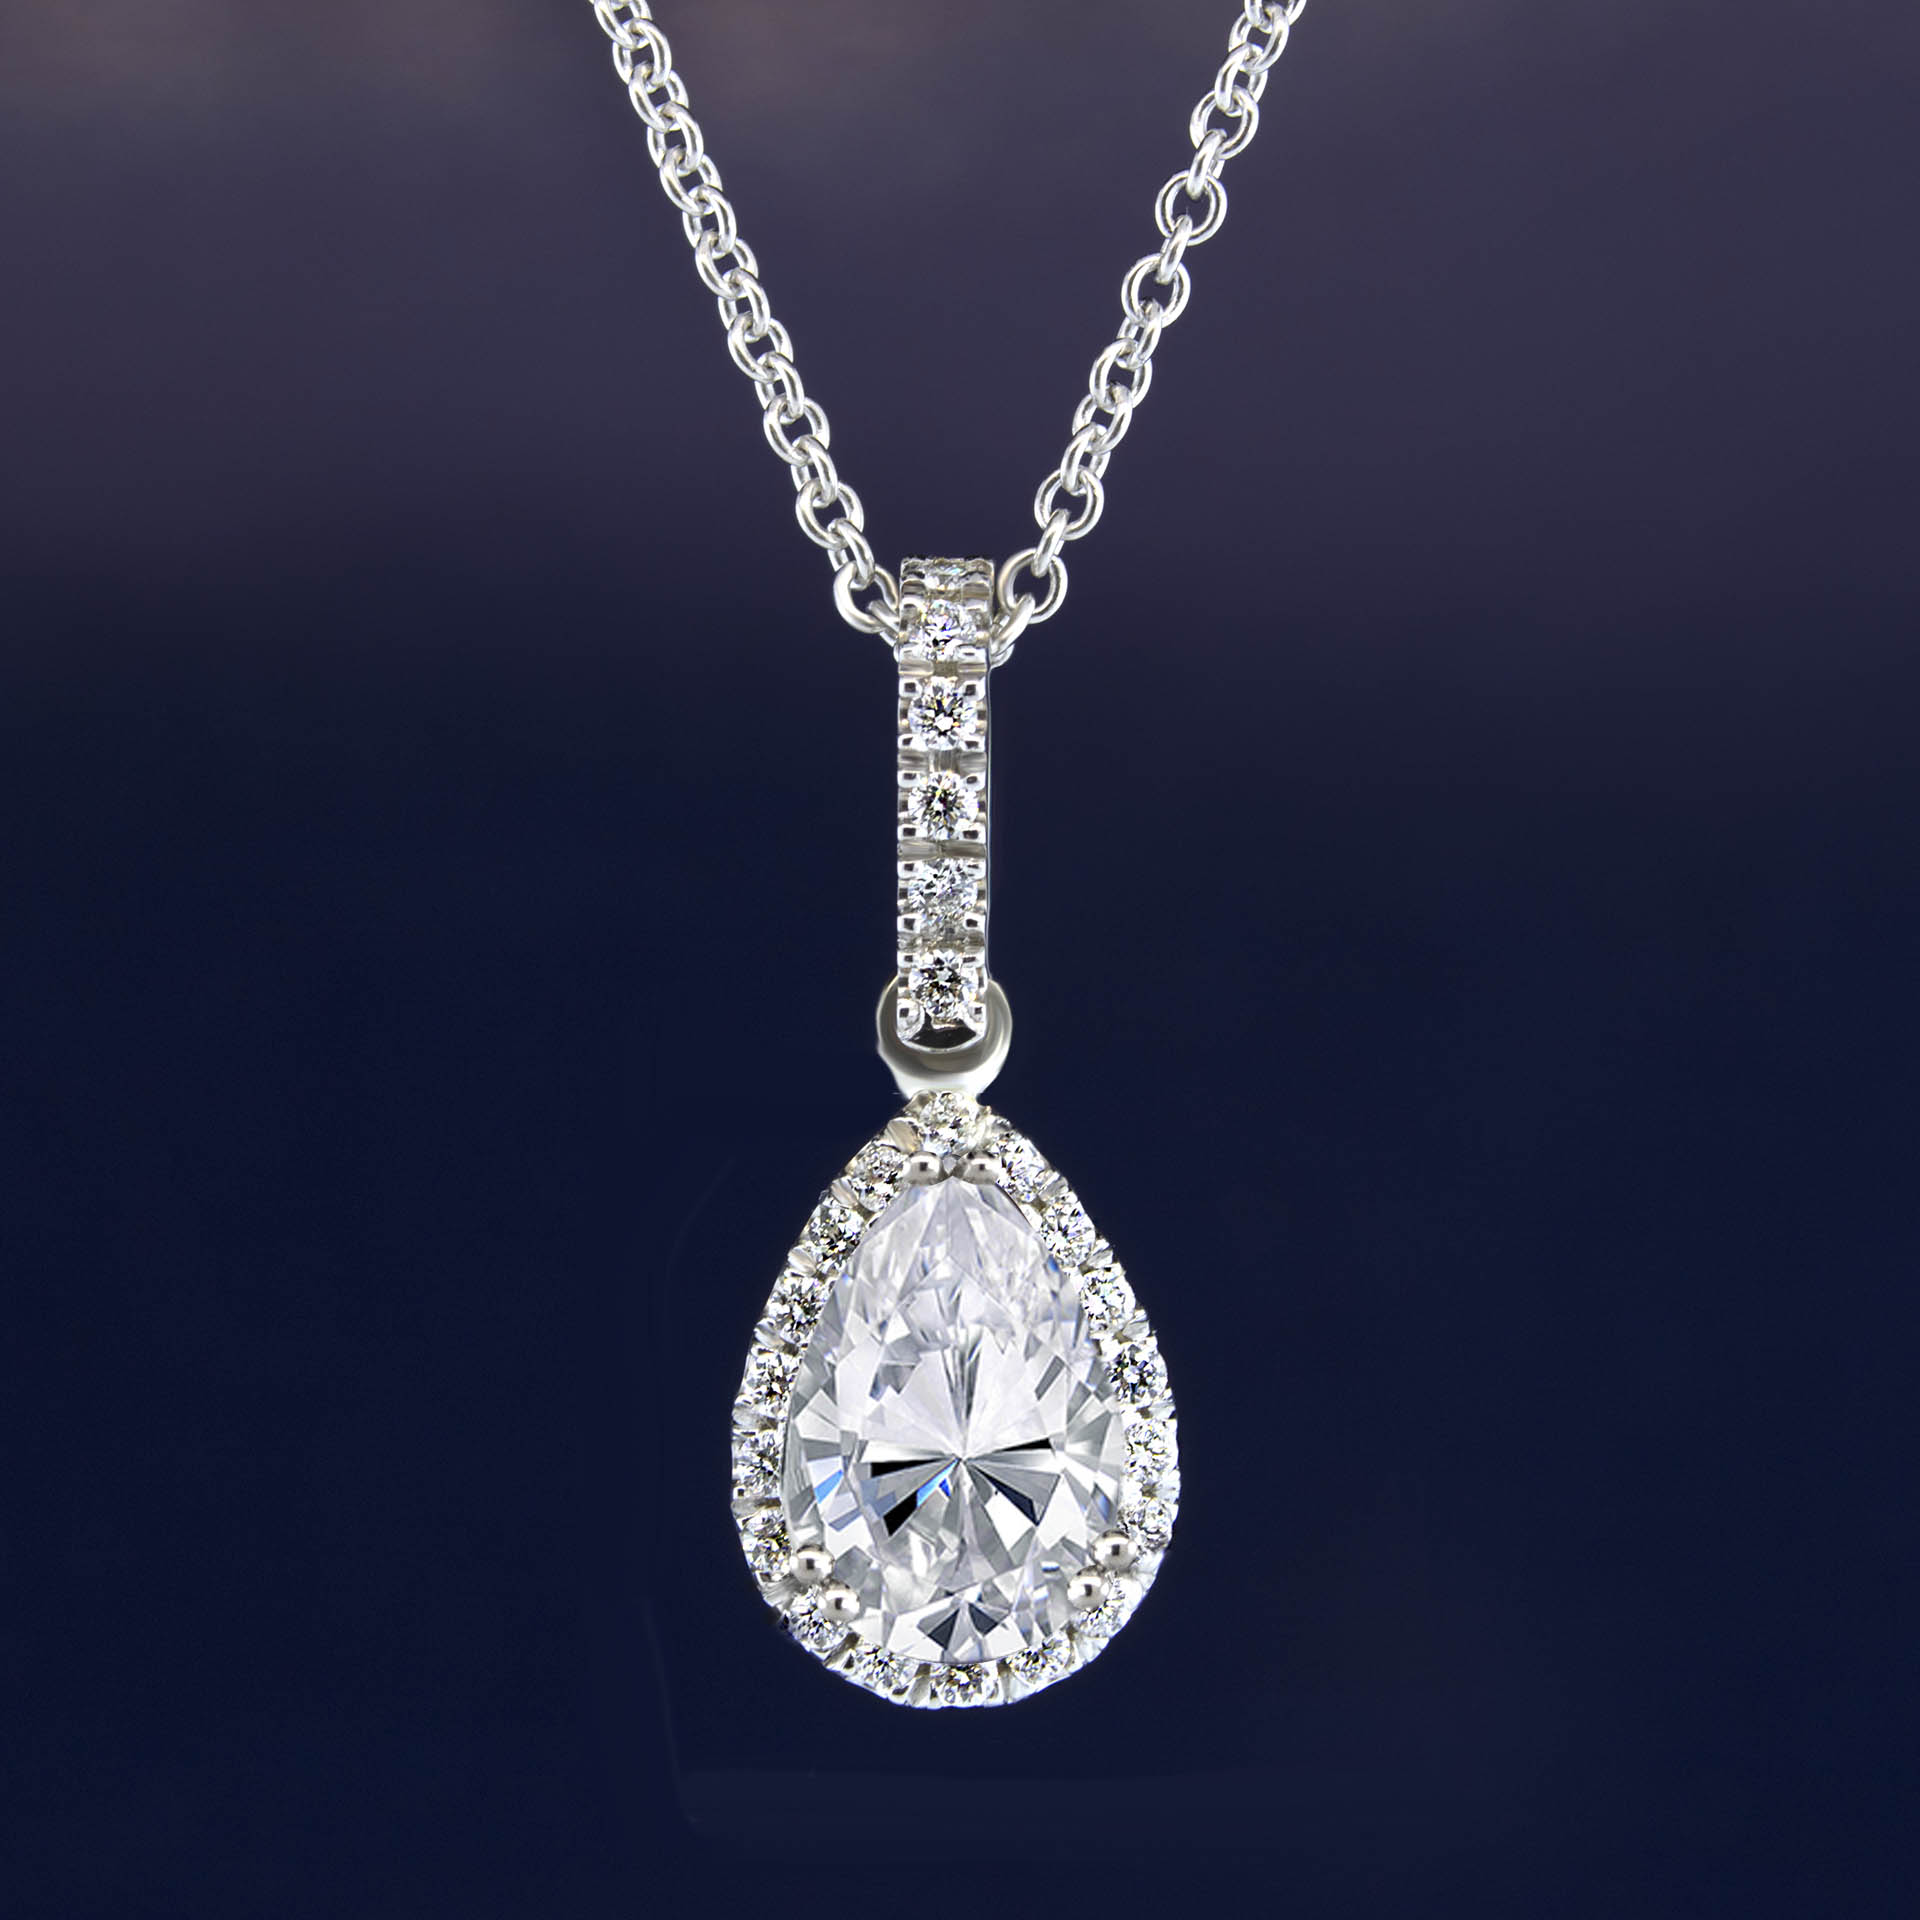 Pear Shaped Diamond Necklace 18K White & Yellow Gold – River's Edge Gems